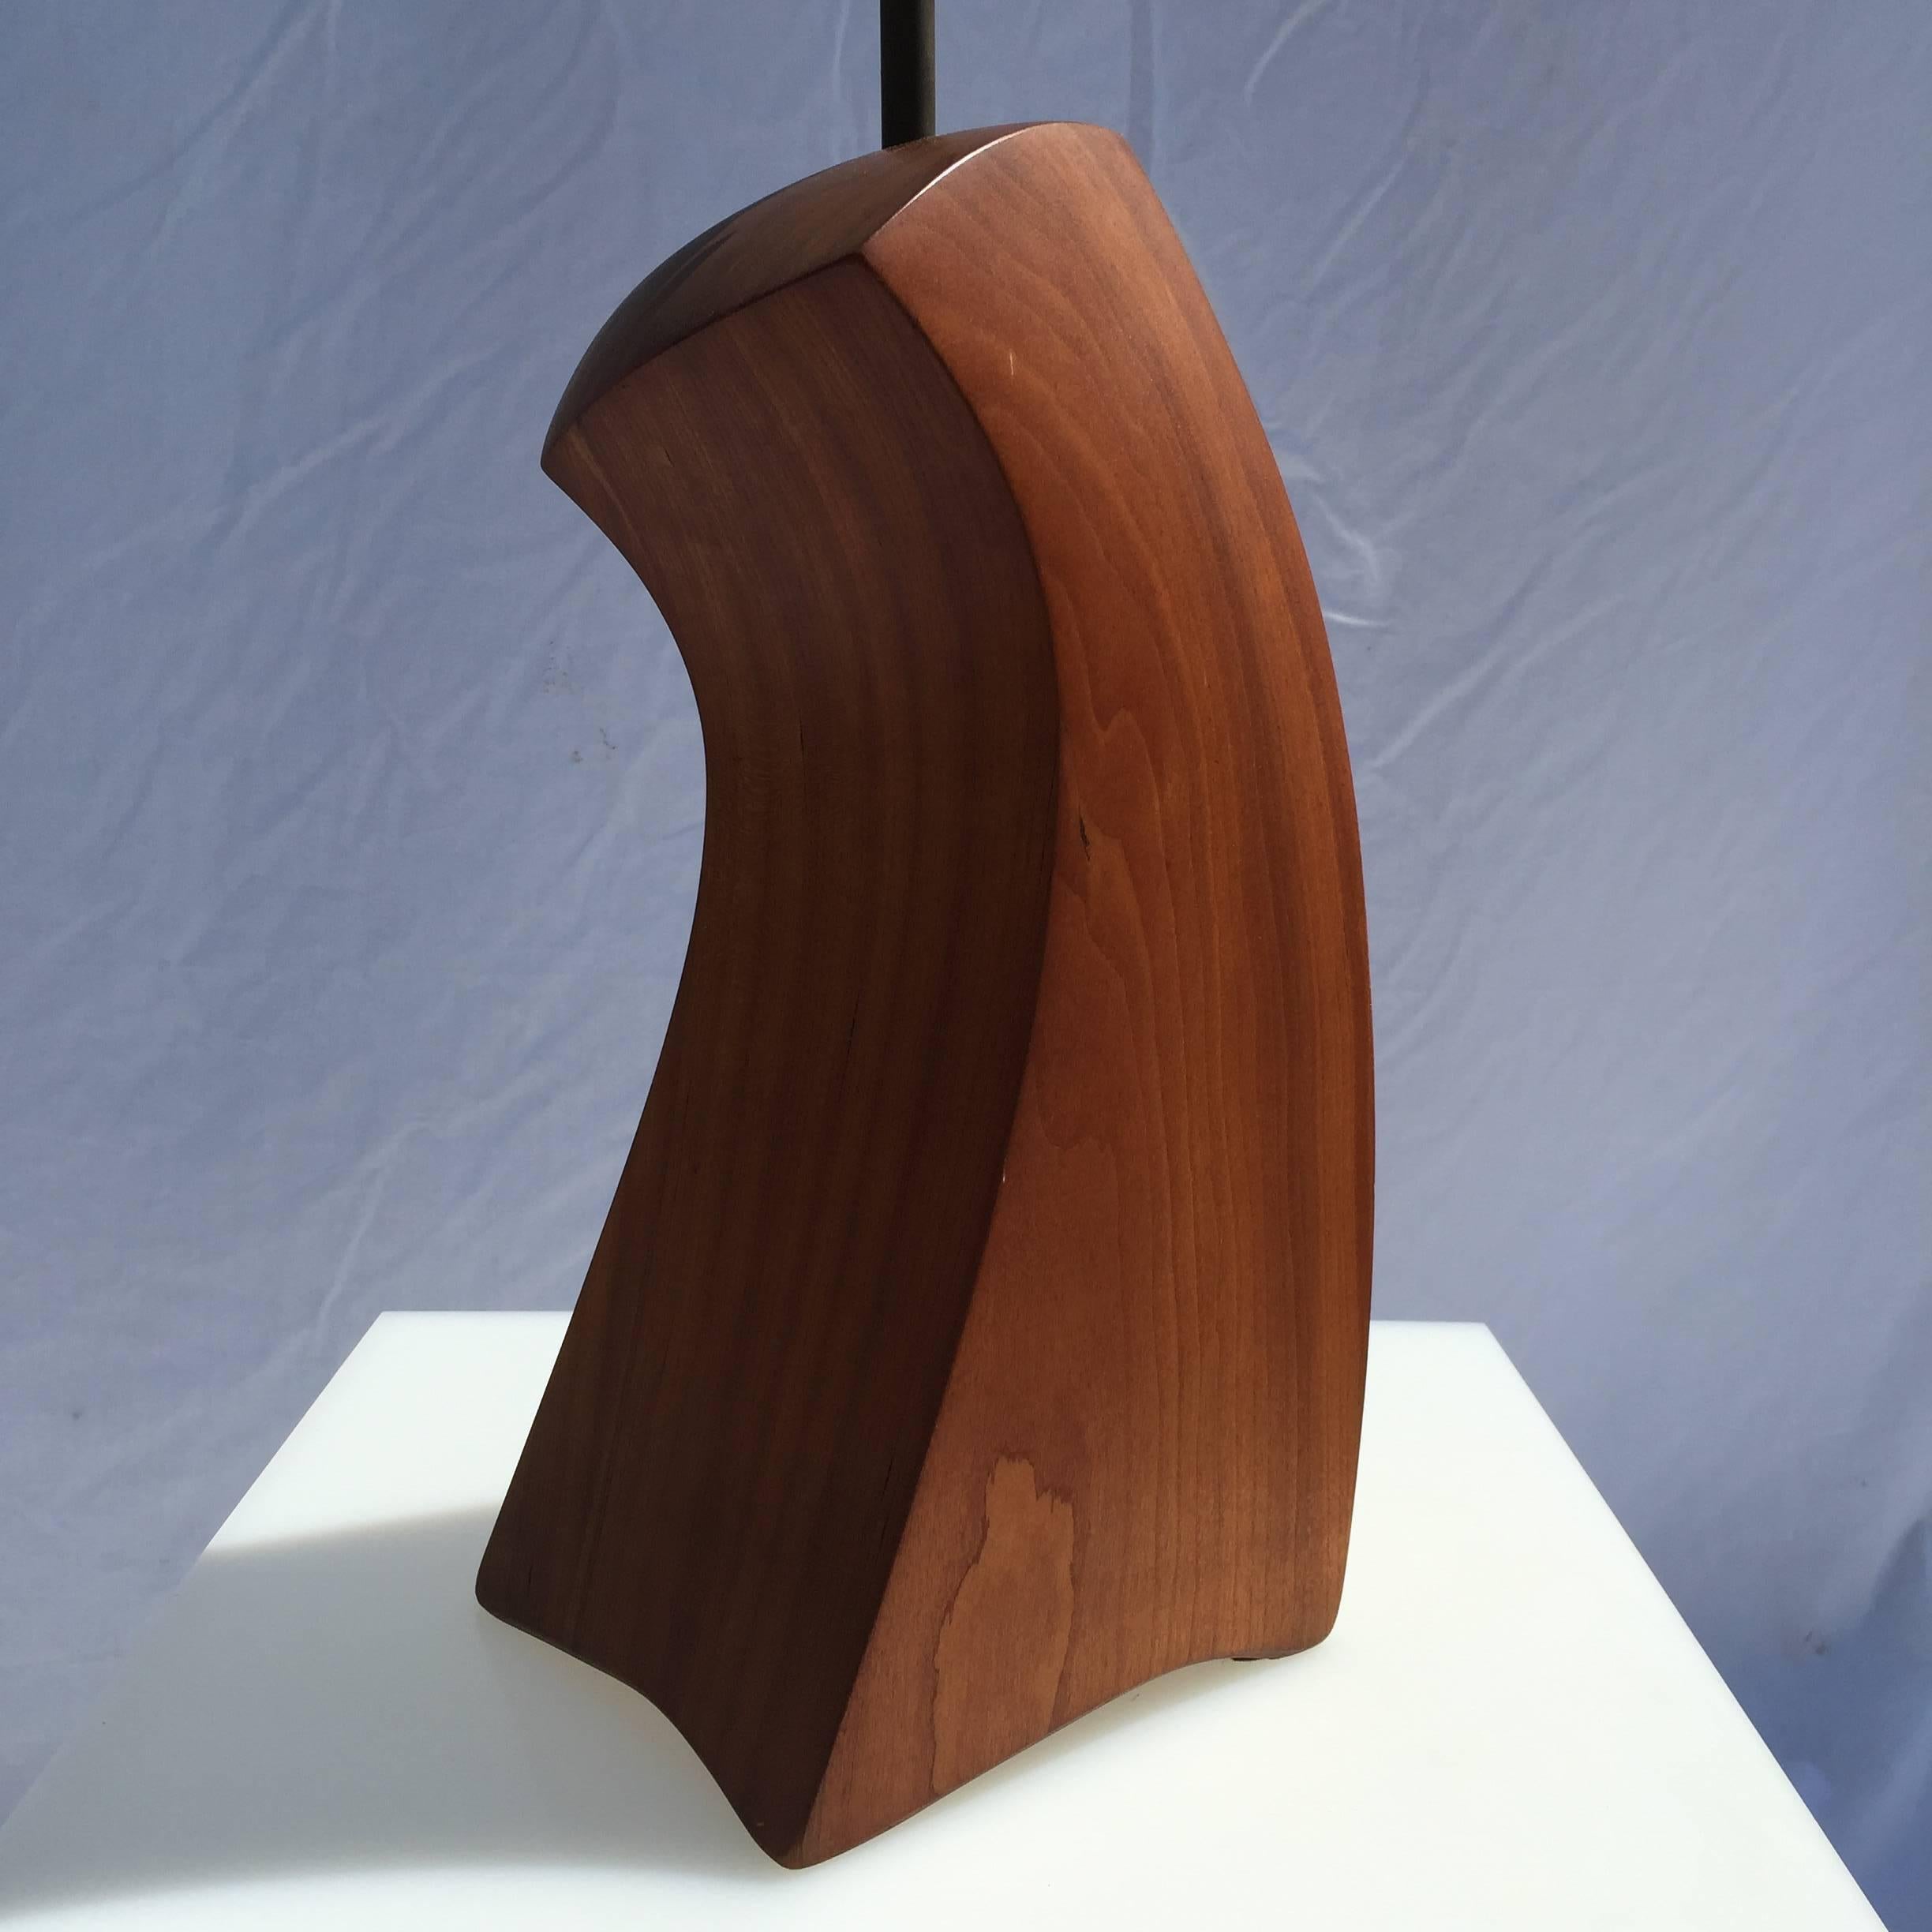 Carved Signed Craft Wood Table Lamp by American Artist Woodworker Eric Sprenger